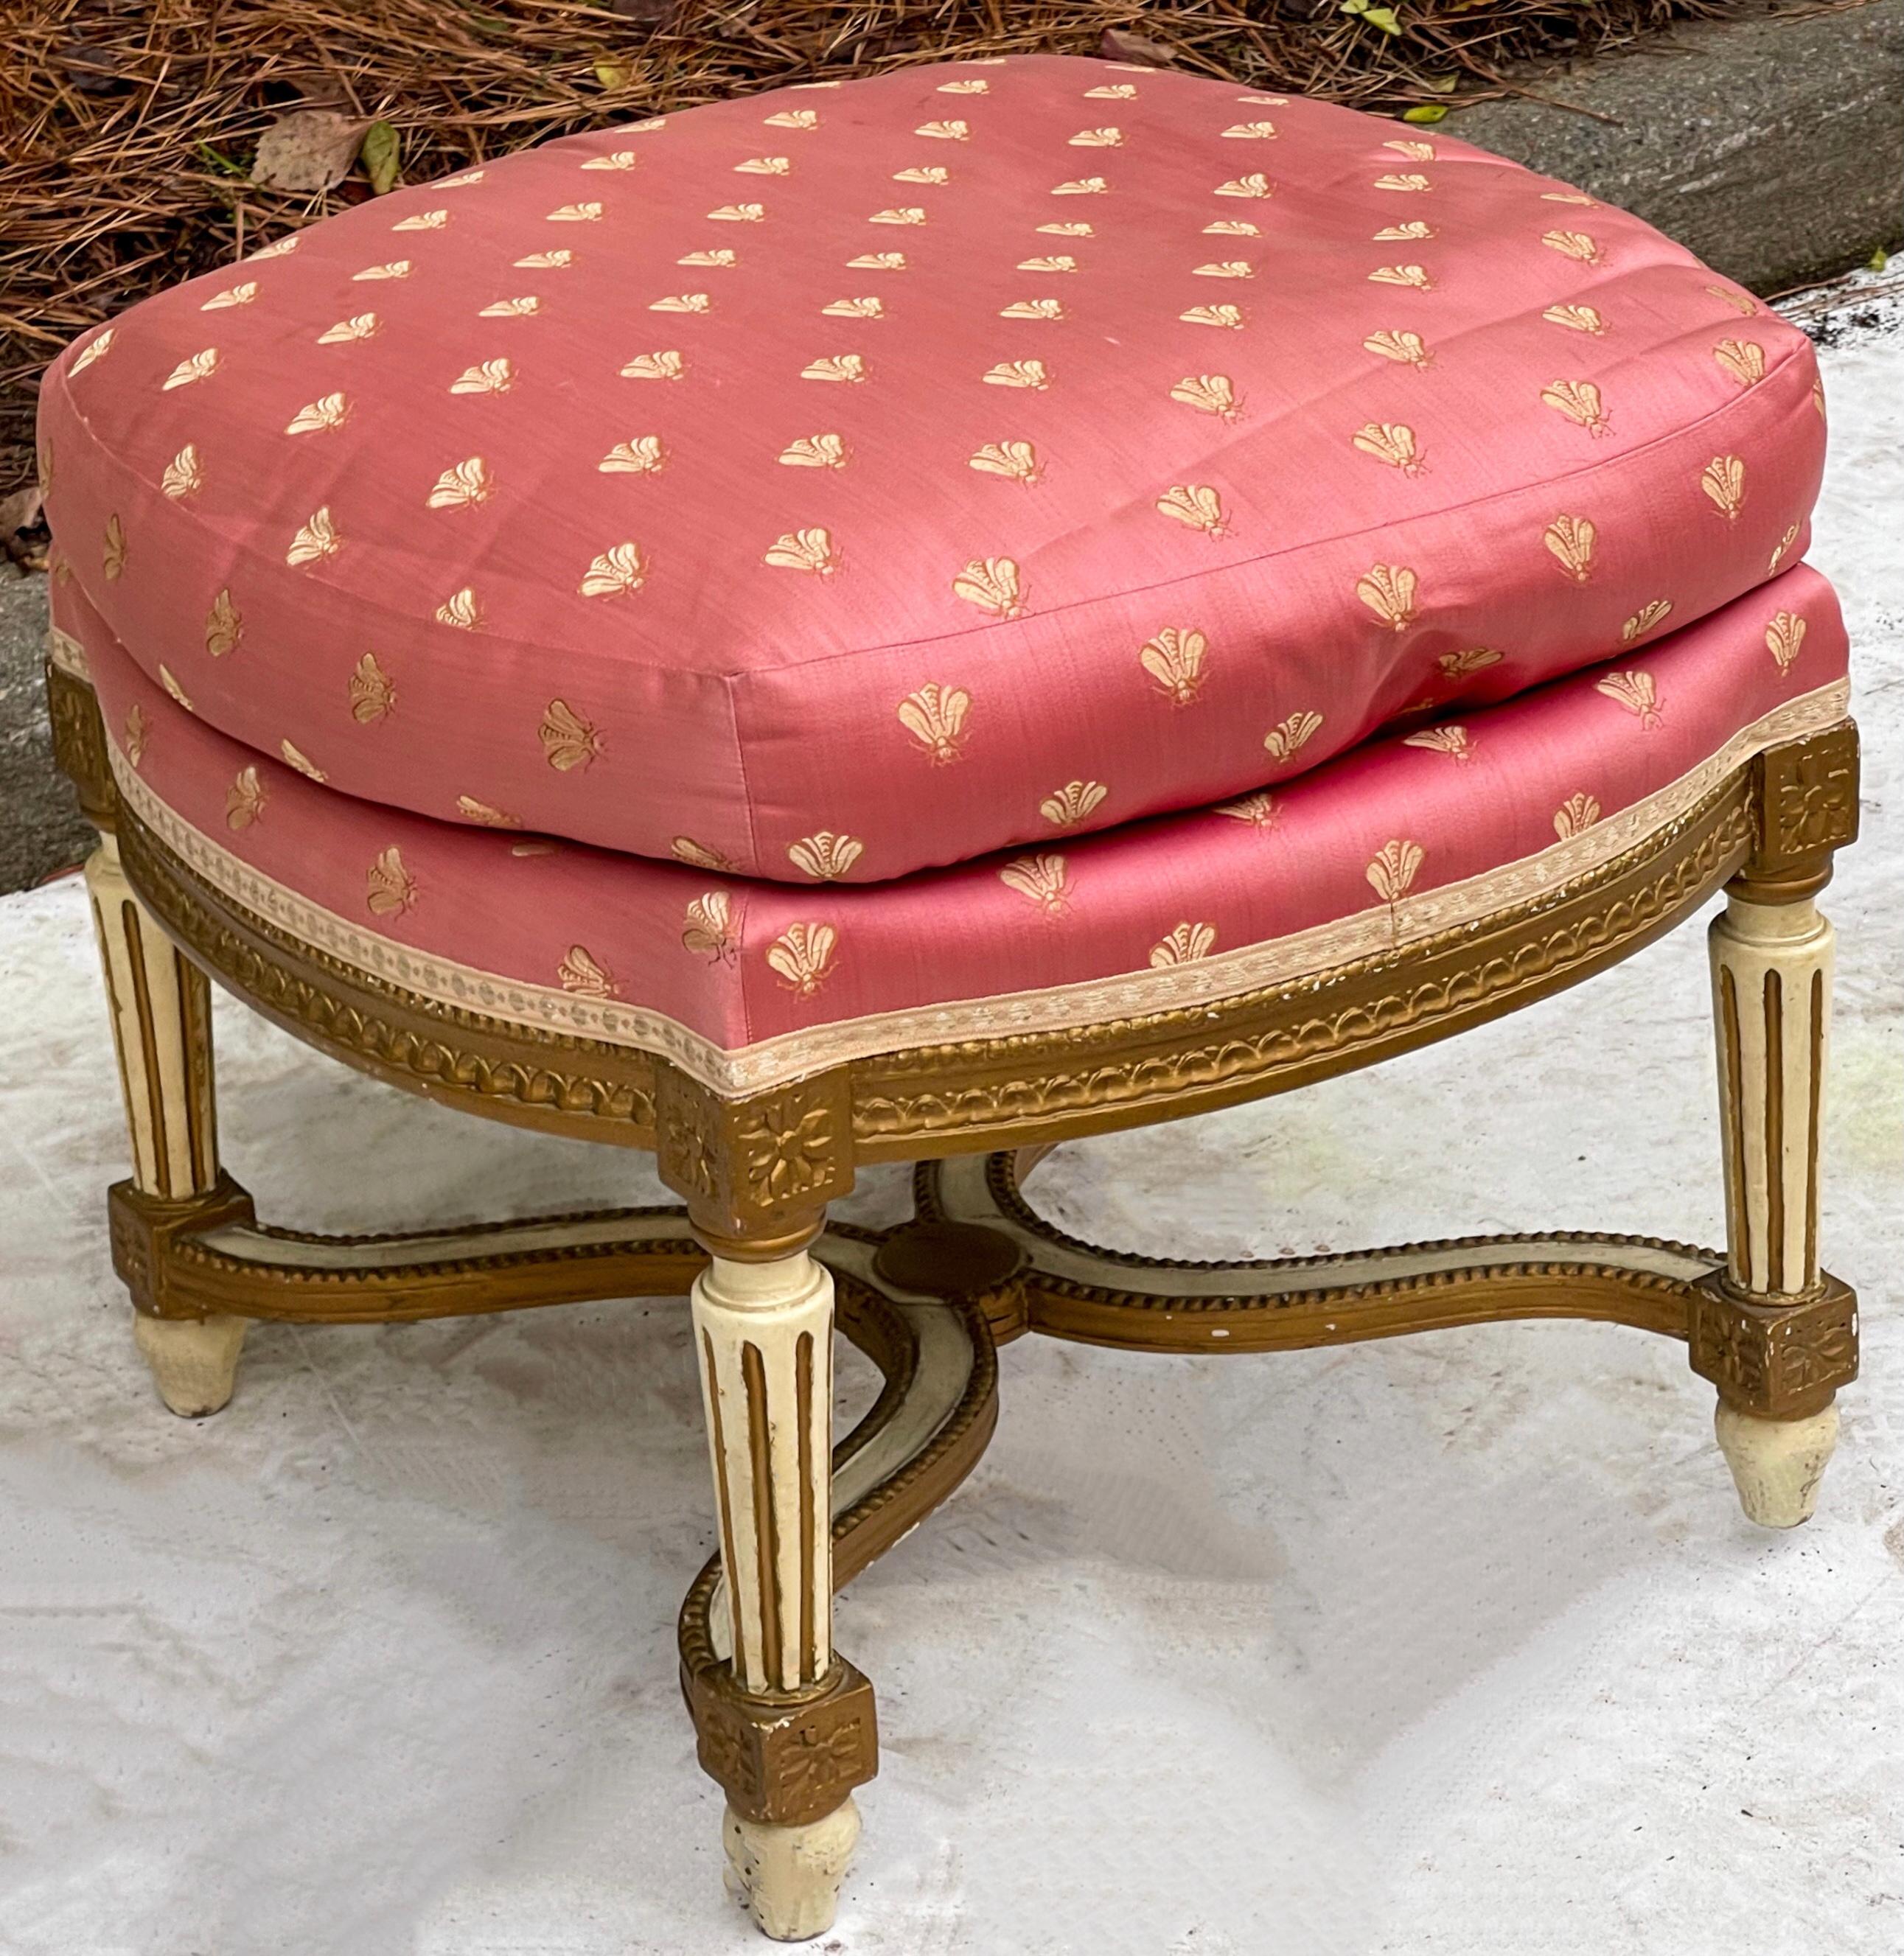 This is a lovely ottoman! It is a French carved giltwood and painted ottoman in vintage pink Napoleonic bee fabric. It is a versatile size and show some age wear to the finish.